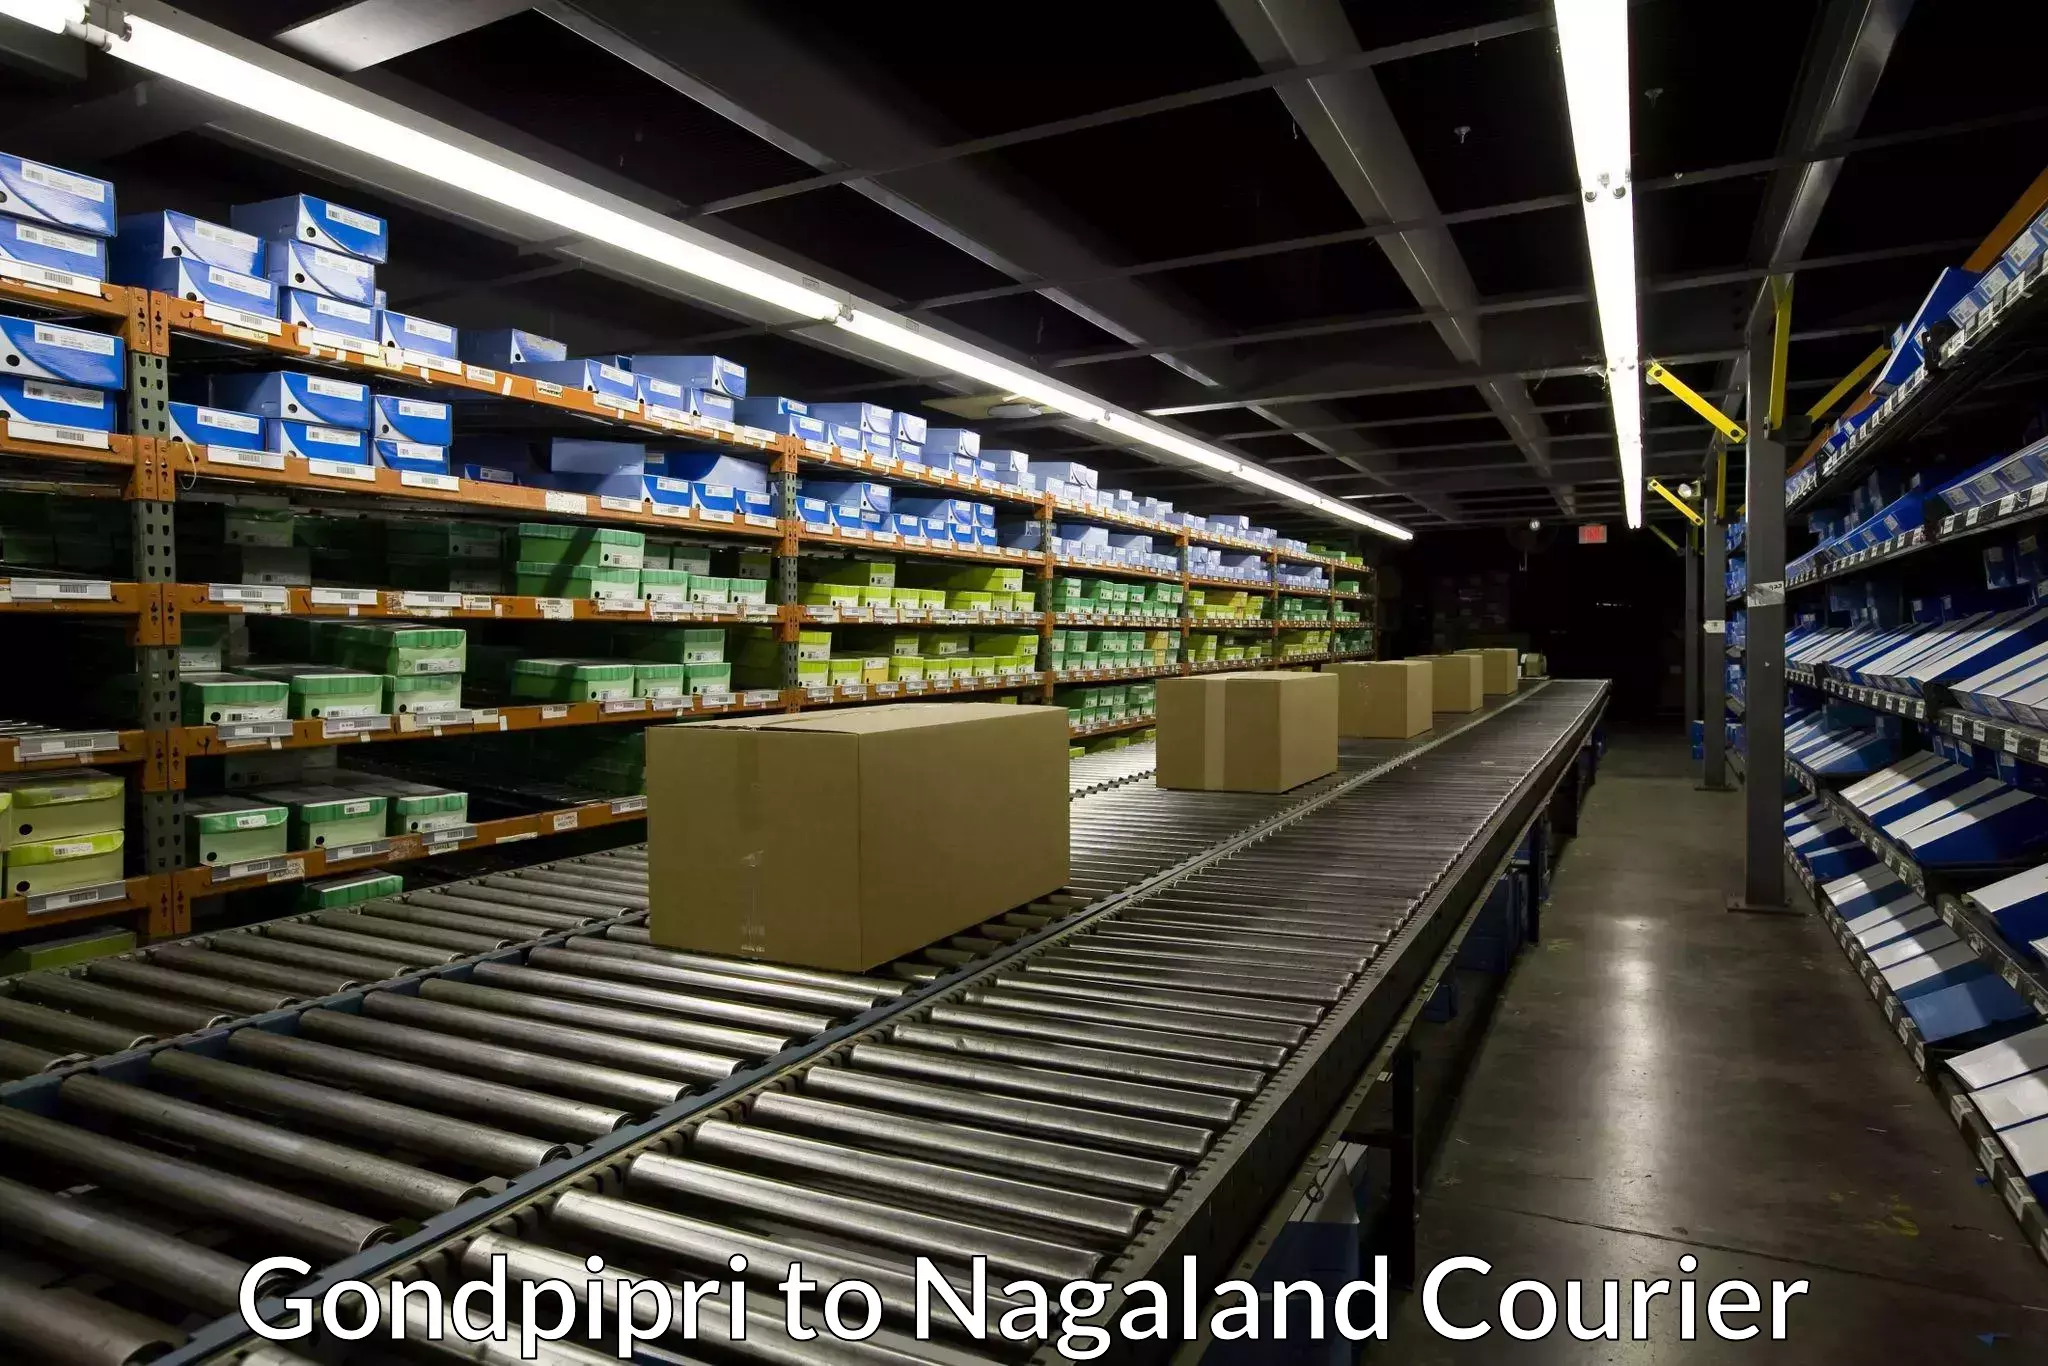 Automated shipping in Gondpipri to Nagaland